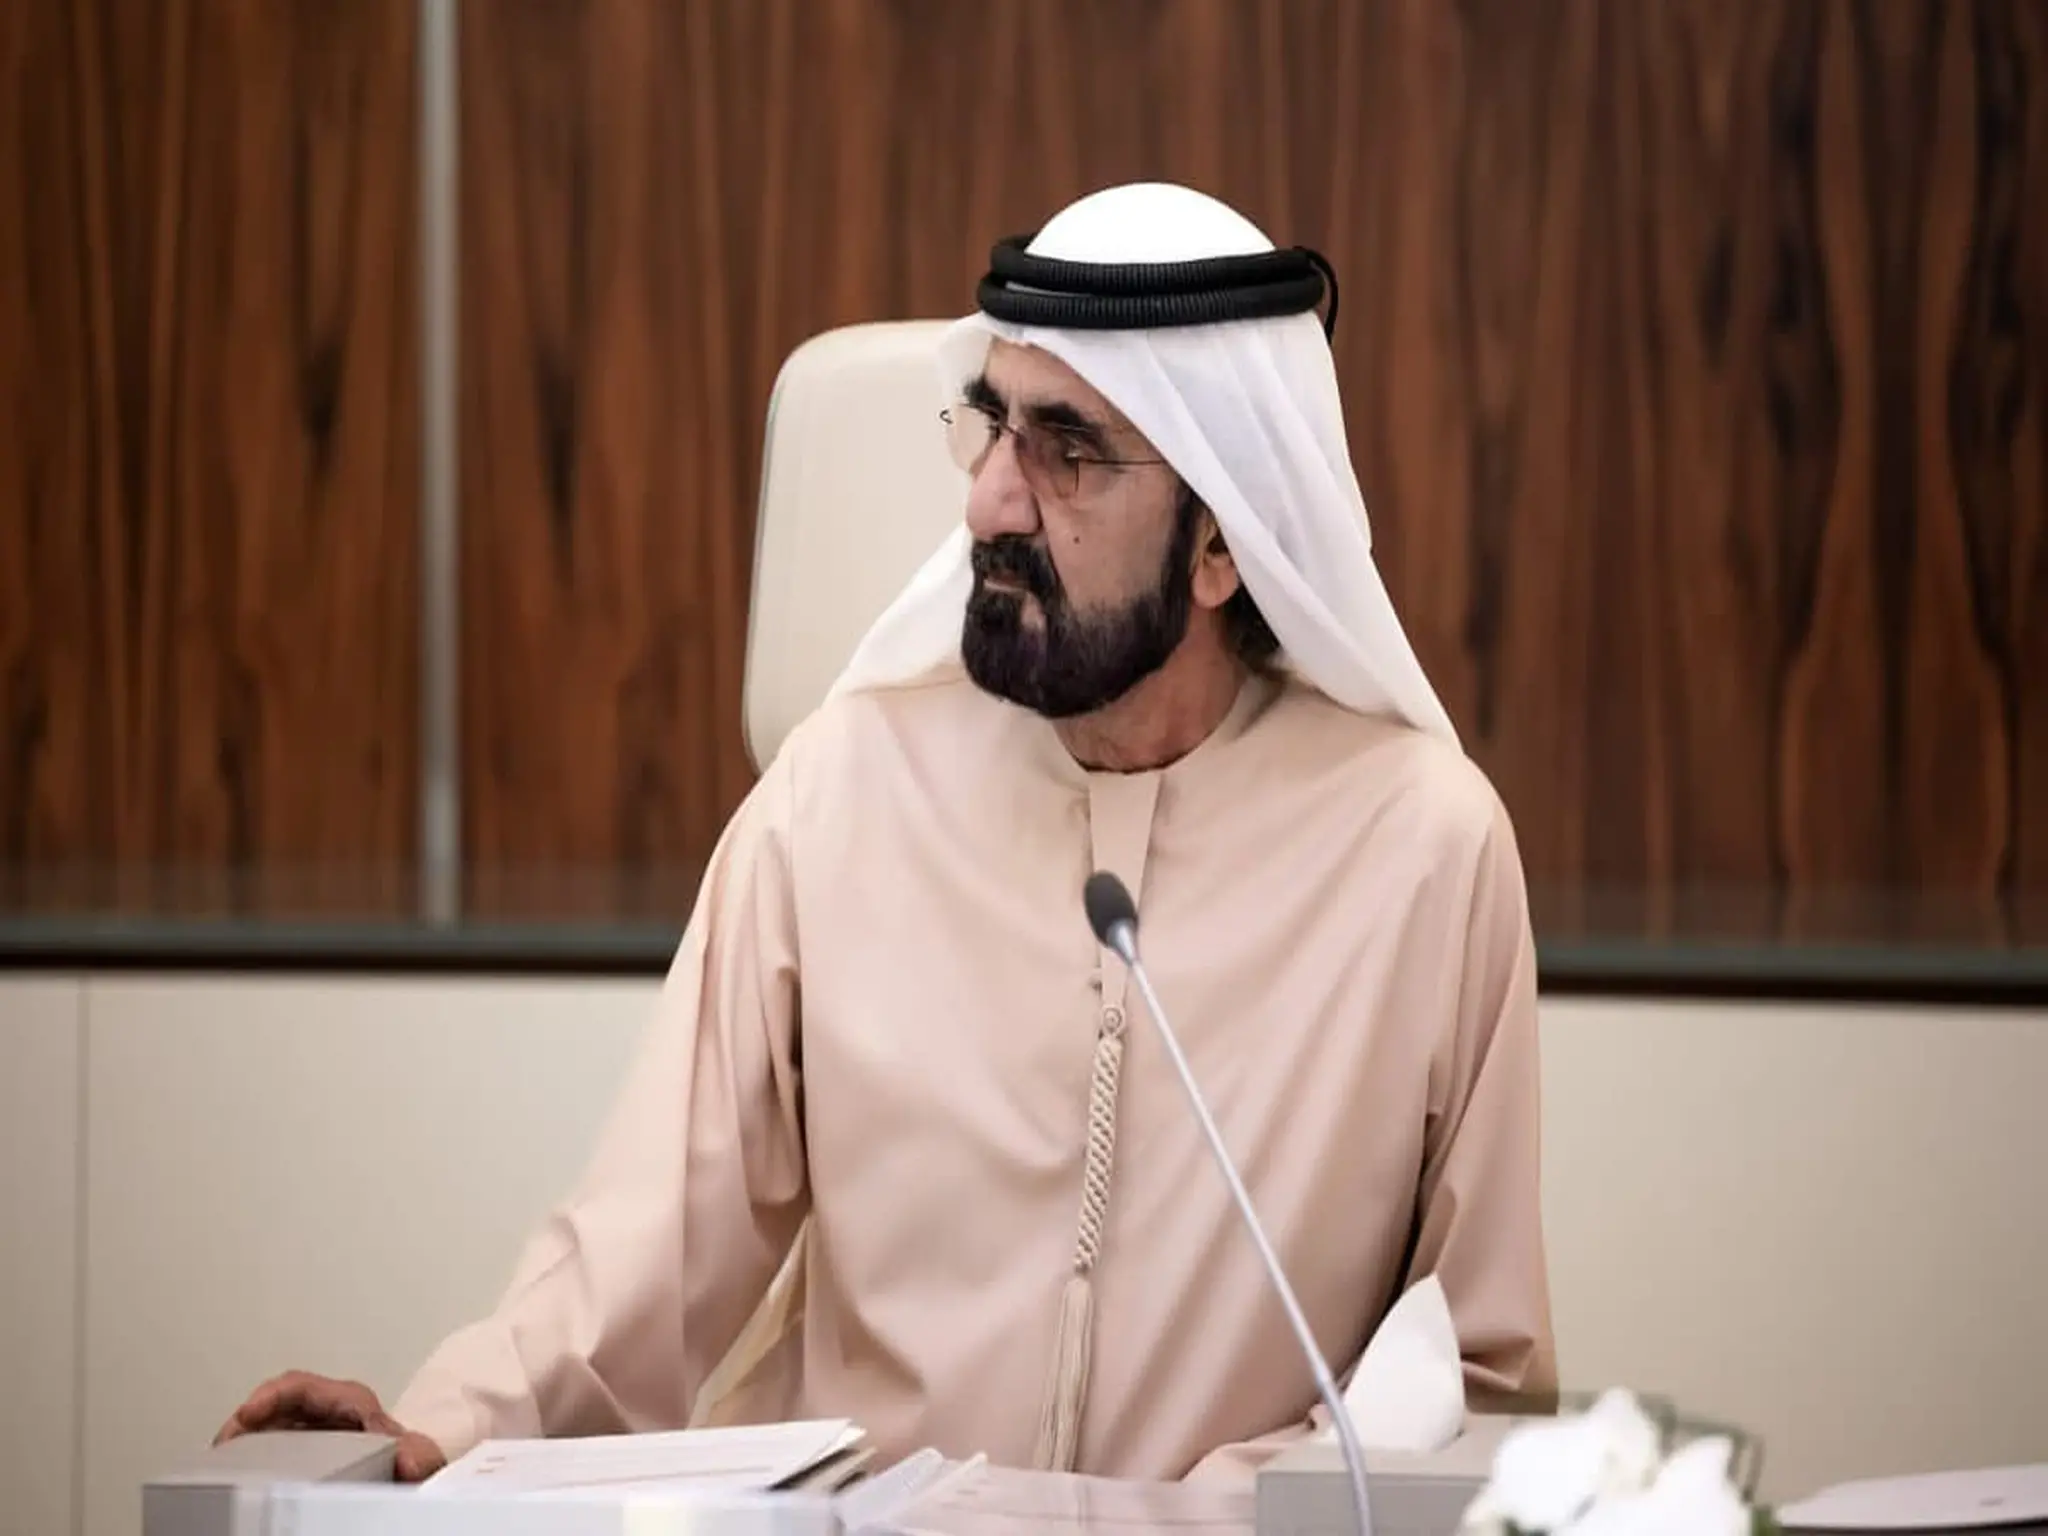 UAE announces a reduction in the prices of 4,000 commodities as part of its Ramadan campaign